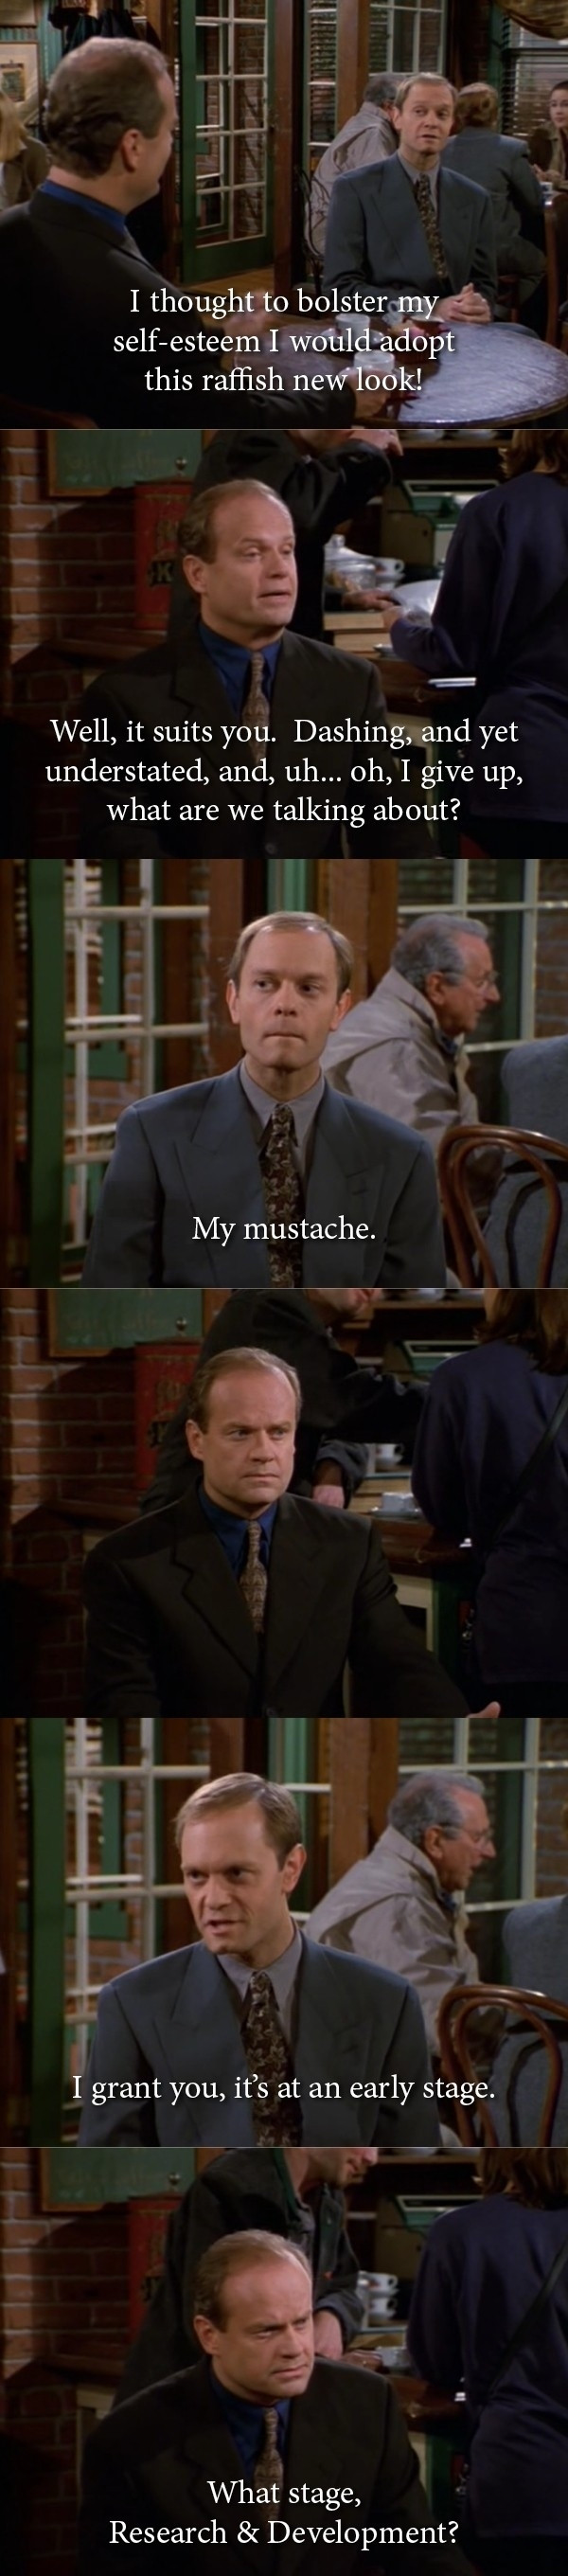 A Frasier tv show character tells his friend he's adopted a new look by growing a mustache only he has no visible mustache to which his friend replies what stage is your mustache at, research and development?